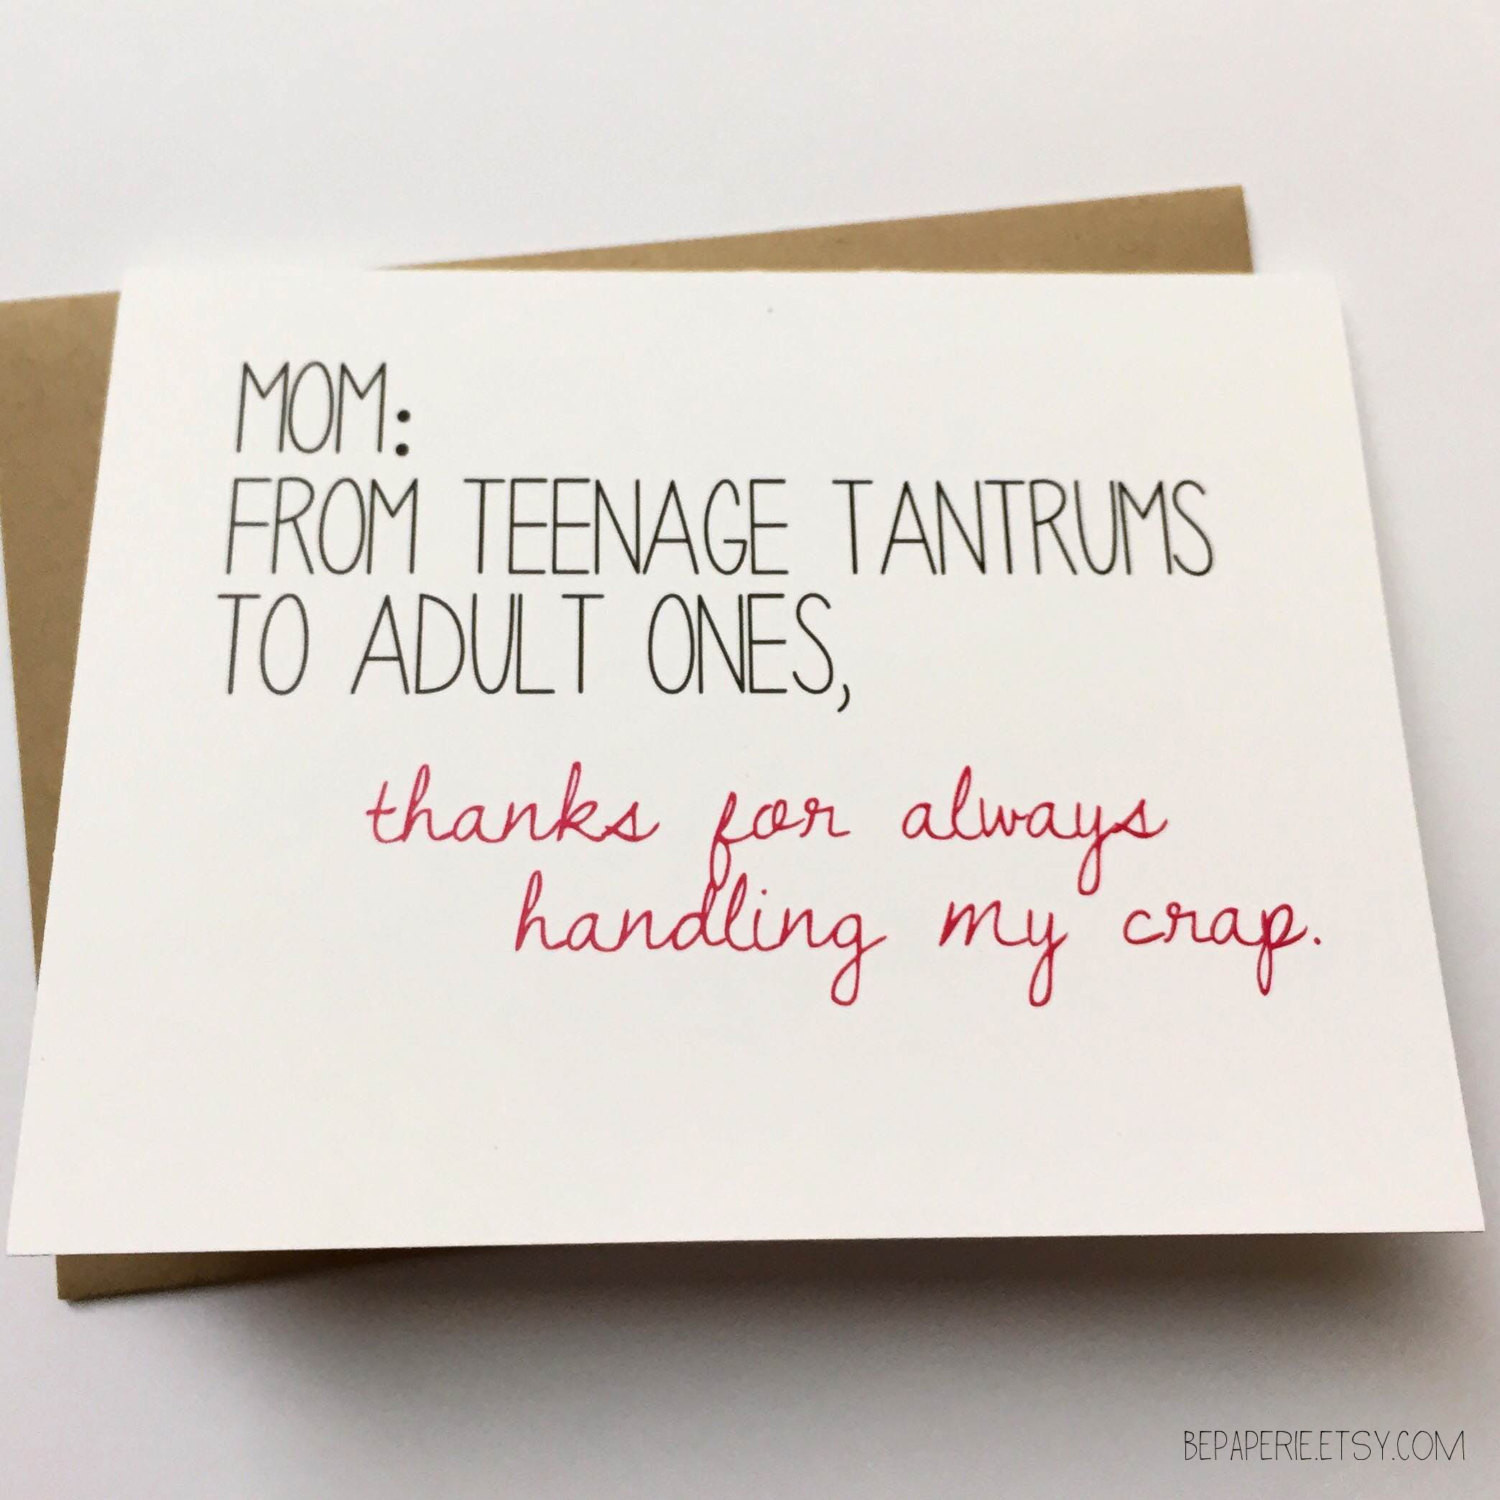 Funny Birthday Quotes For Moms
 Mom Card Funny Card for Mom Mom Birthday Card Funny